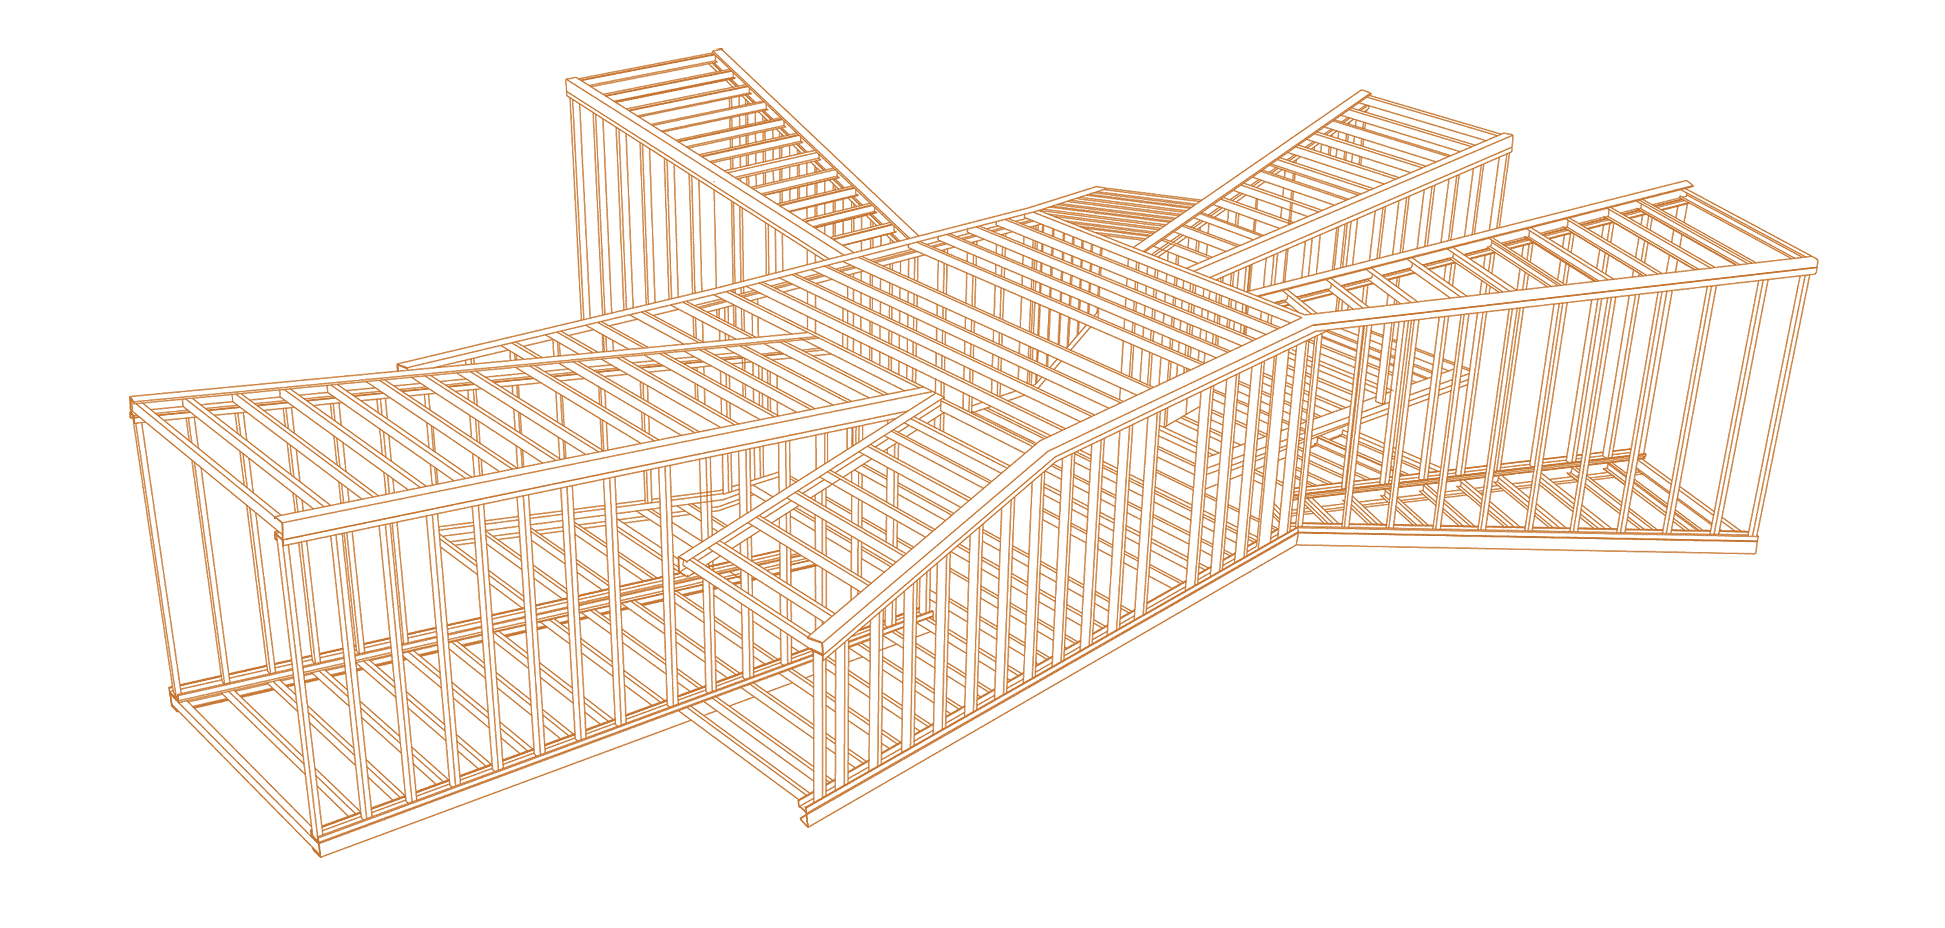 A computer render of the structure of the Shelter for Pilgrims